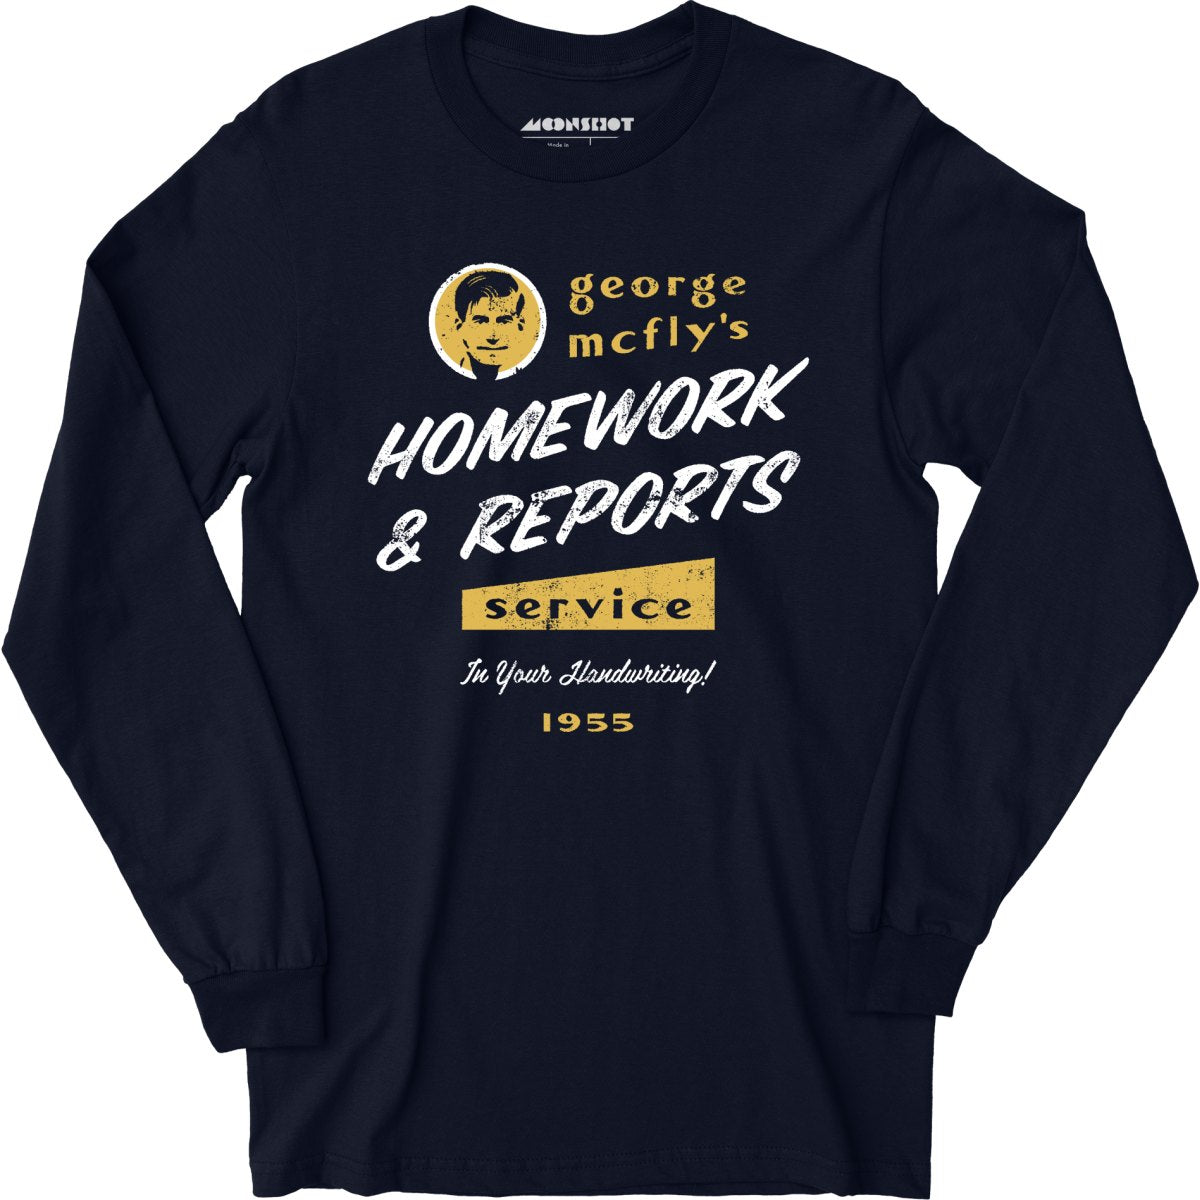 George McFly's Homework & Reports Service - Long Sleeve T-Shirt